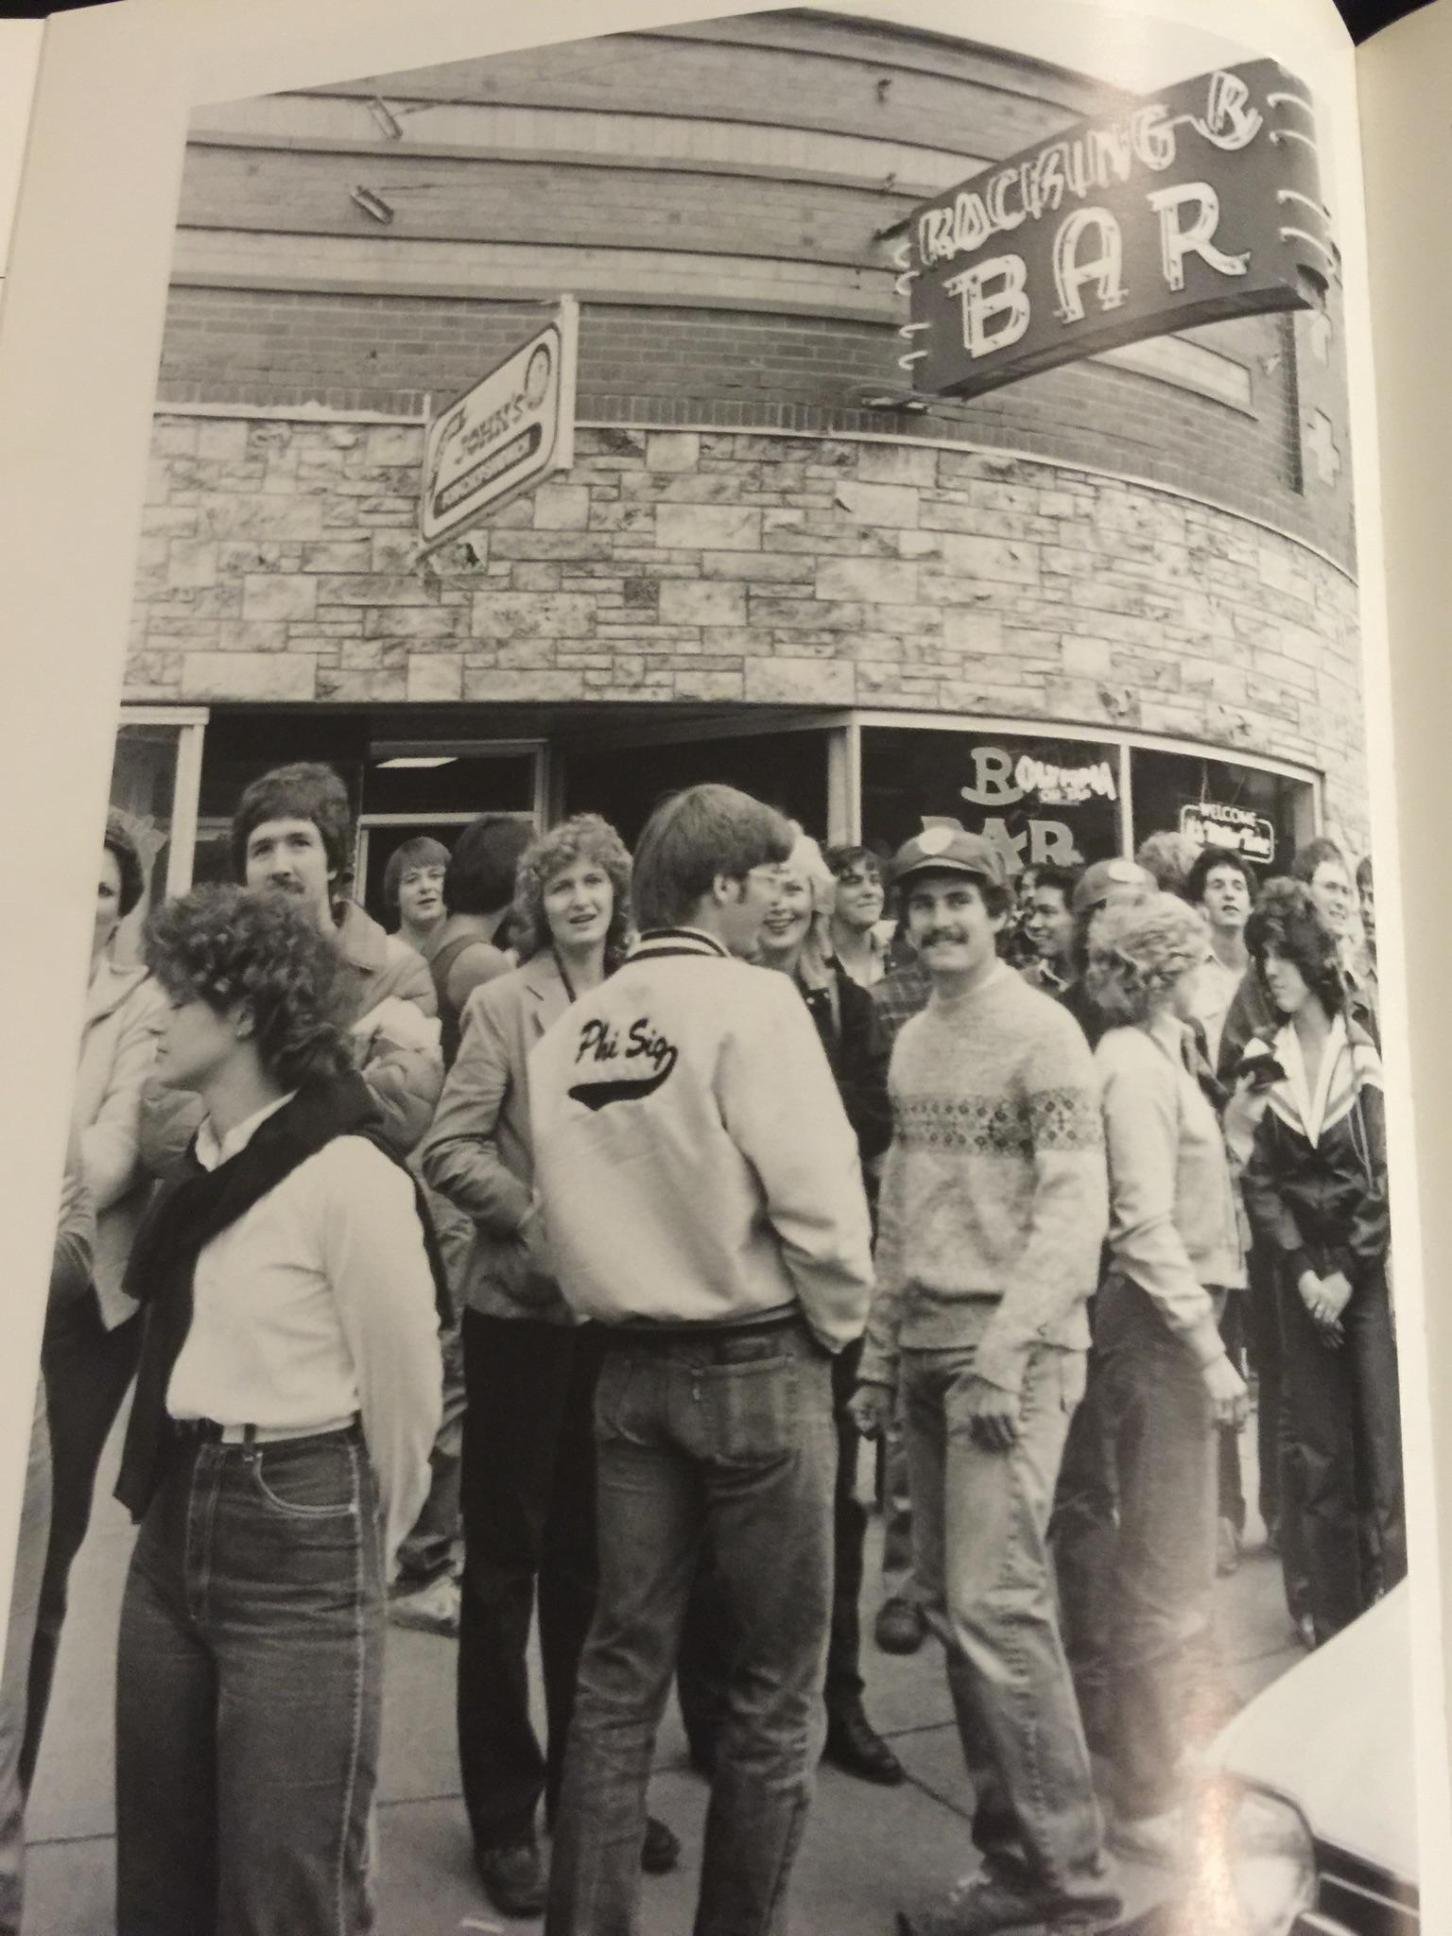 Vintage Photo of a crowd of people standing outside the front of the Rocking R Bar